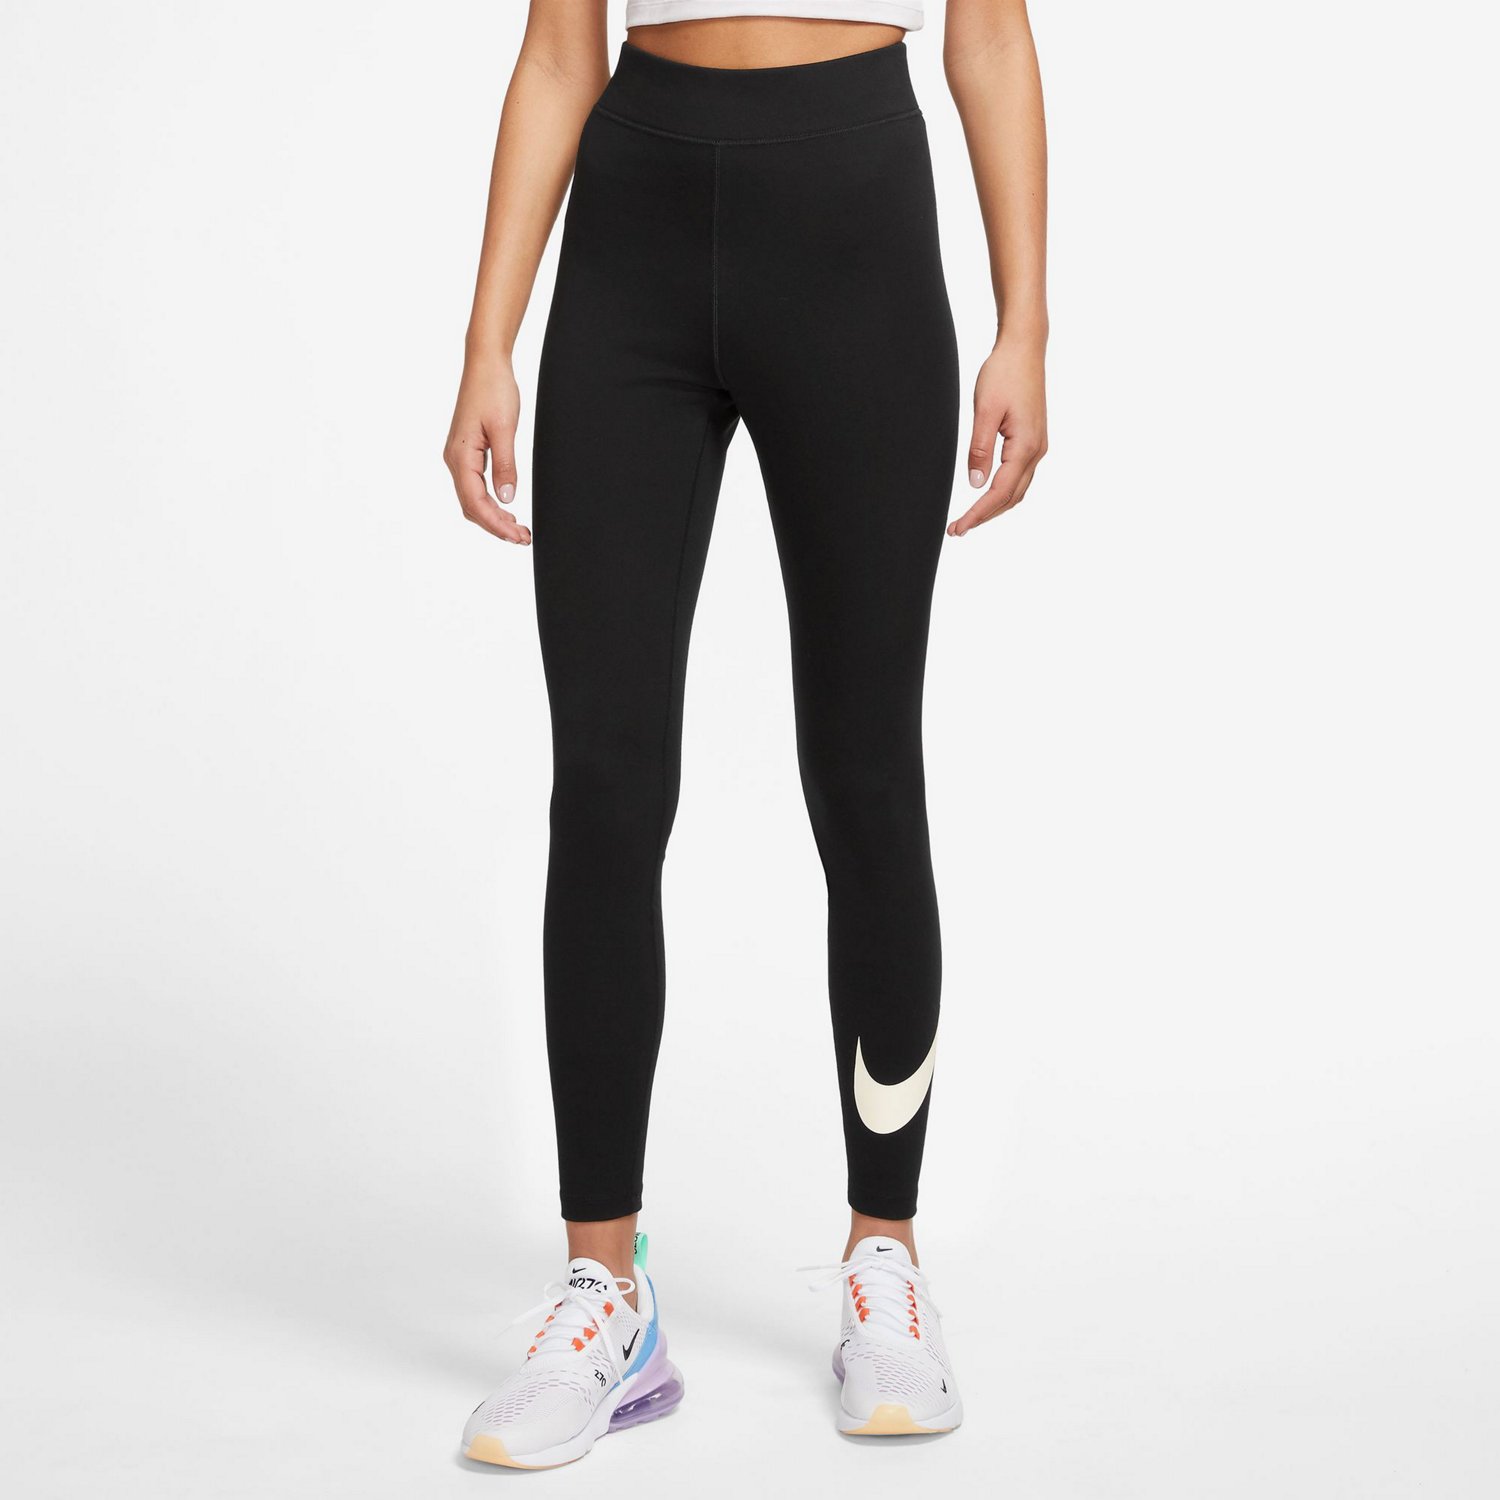 Nike Women's One Mid Rise 2.0 Plus Size Tights